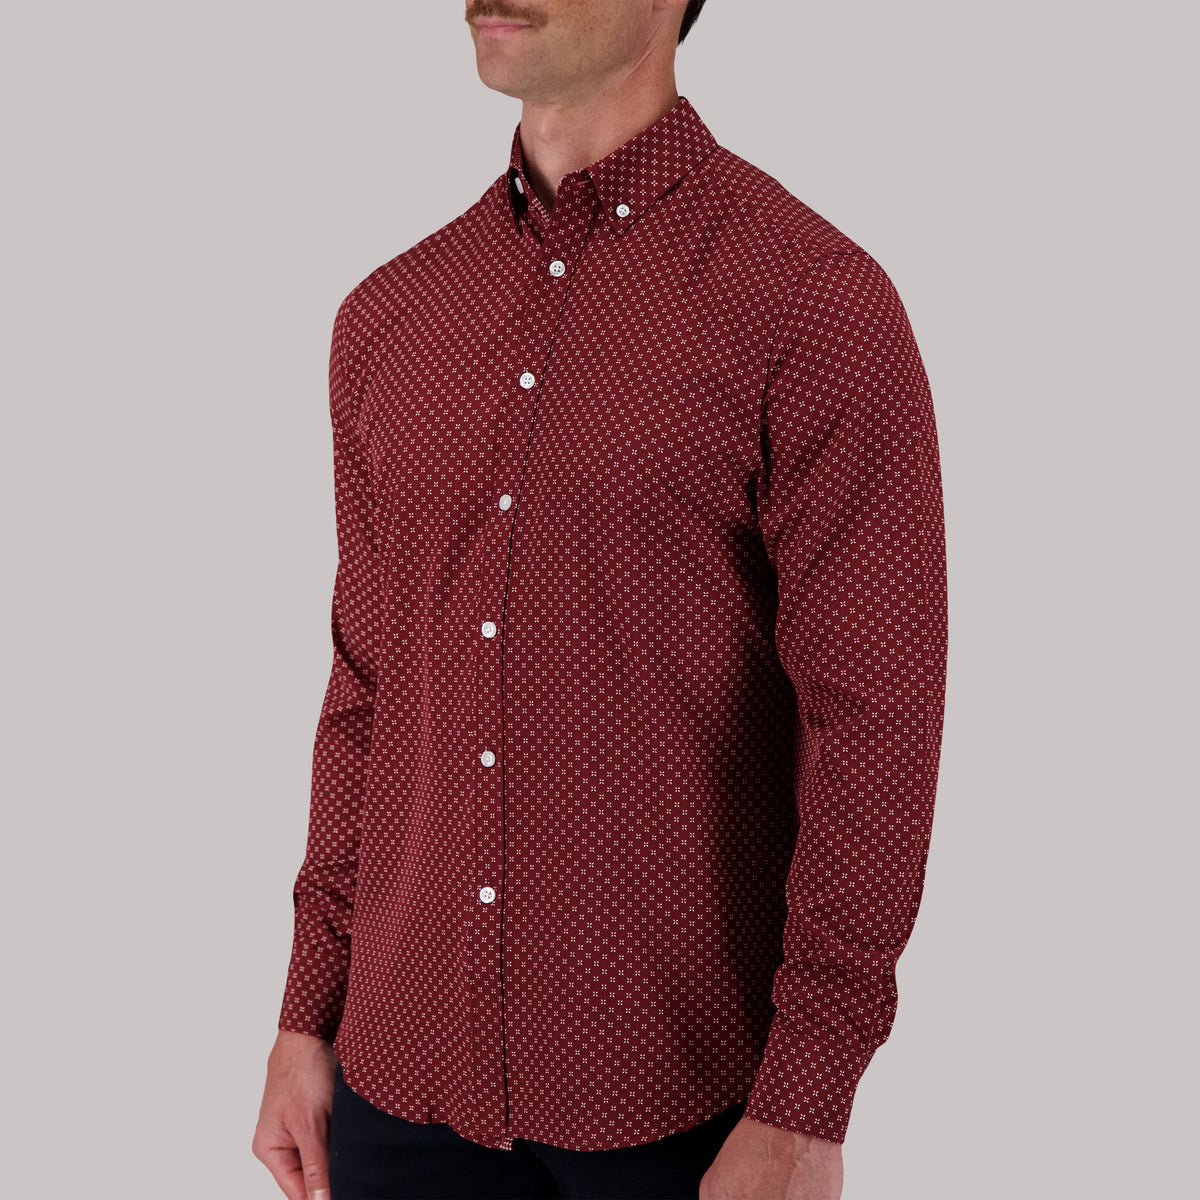 Model Side View of Long Sleeve 4-Way Sport Shirt with Geometric Print in Burgundy